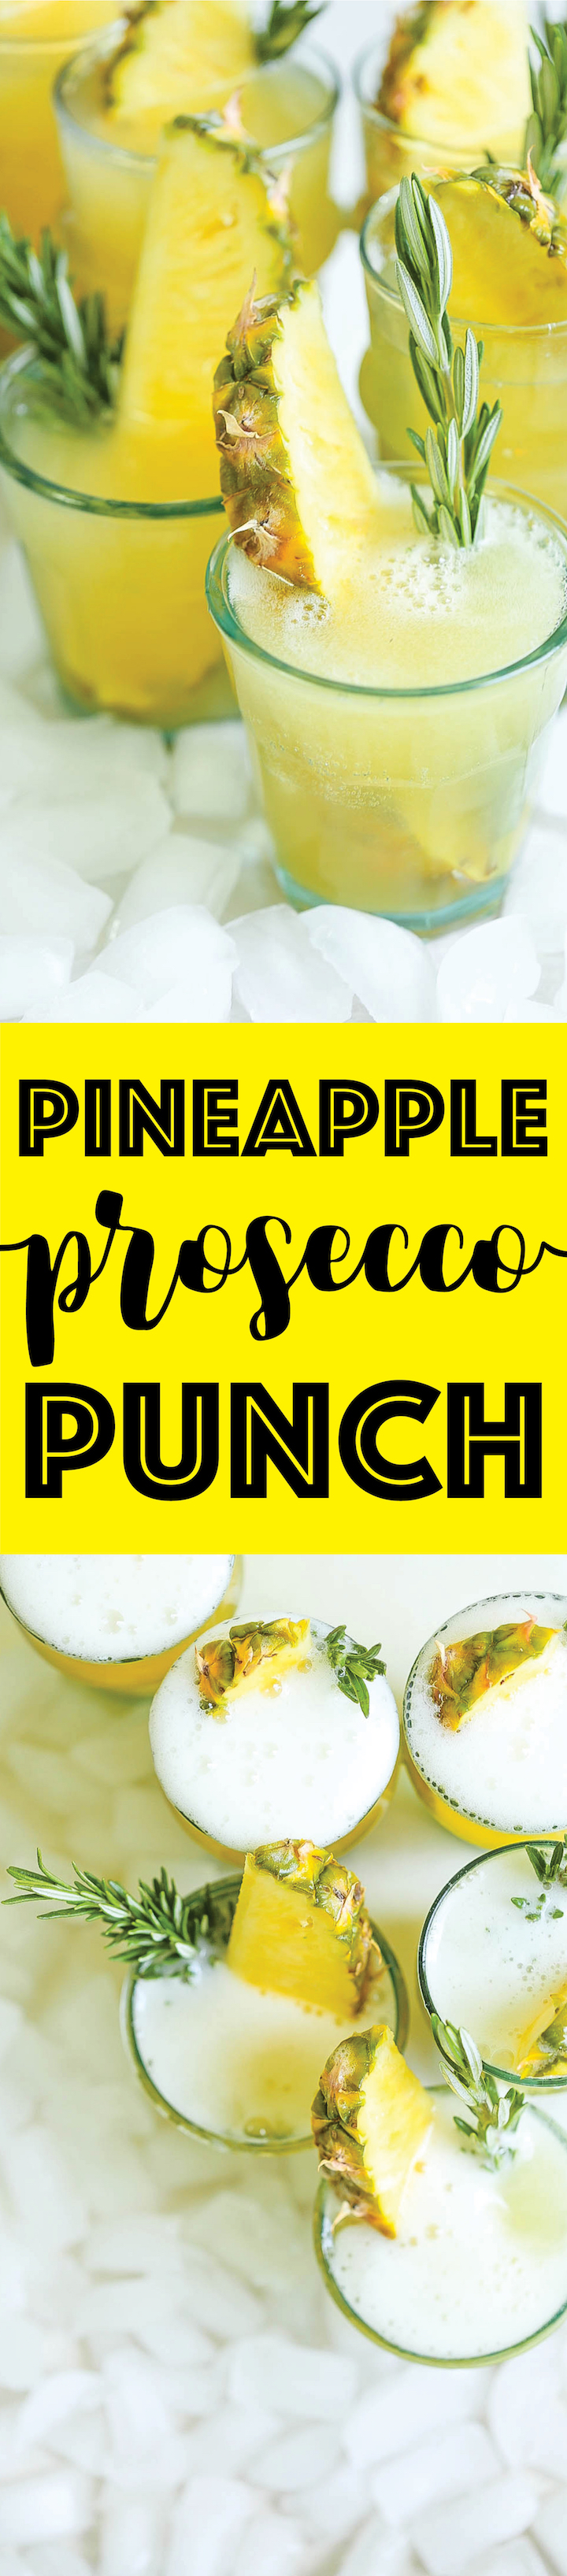 Pineapple Prosecco Punch - All you need is 5 ingredients and 5 minutes for this refreshing, beautiful cocktail. Perfect for any occasion or get-together!